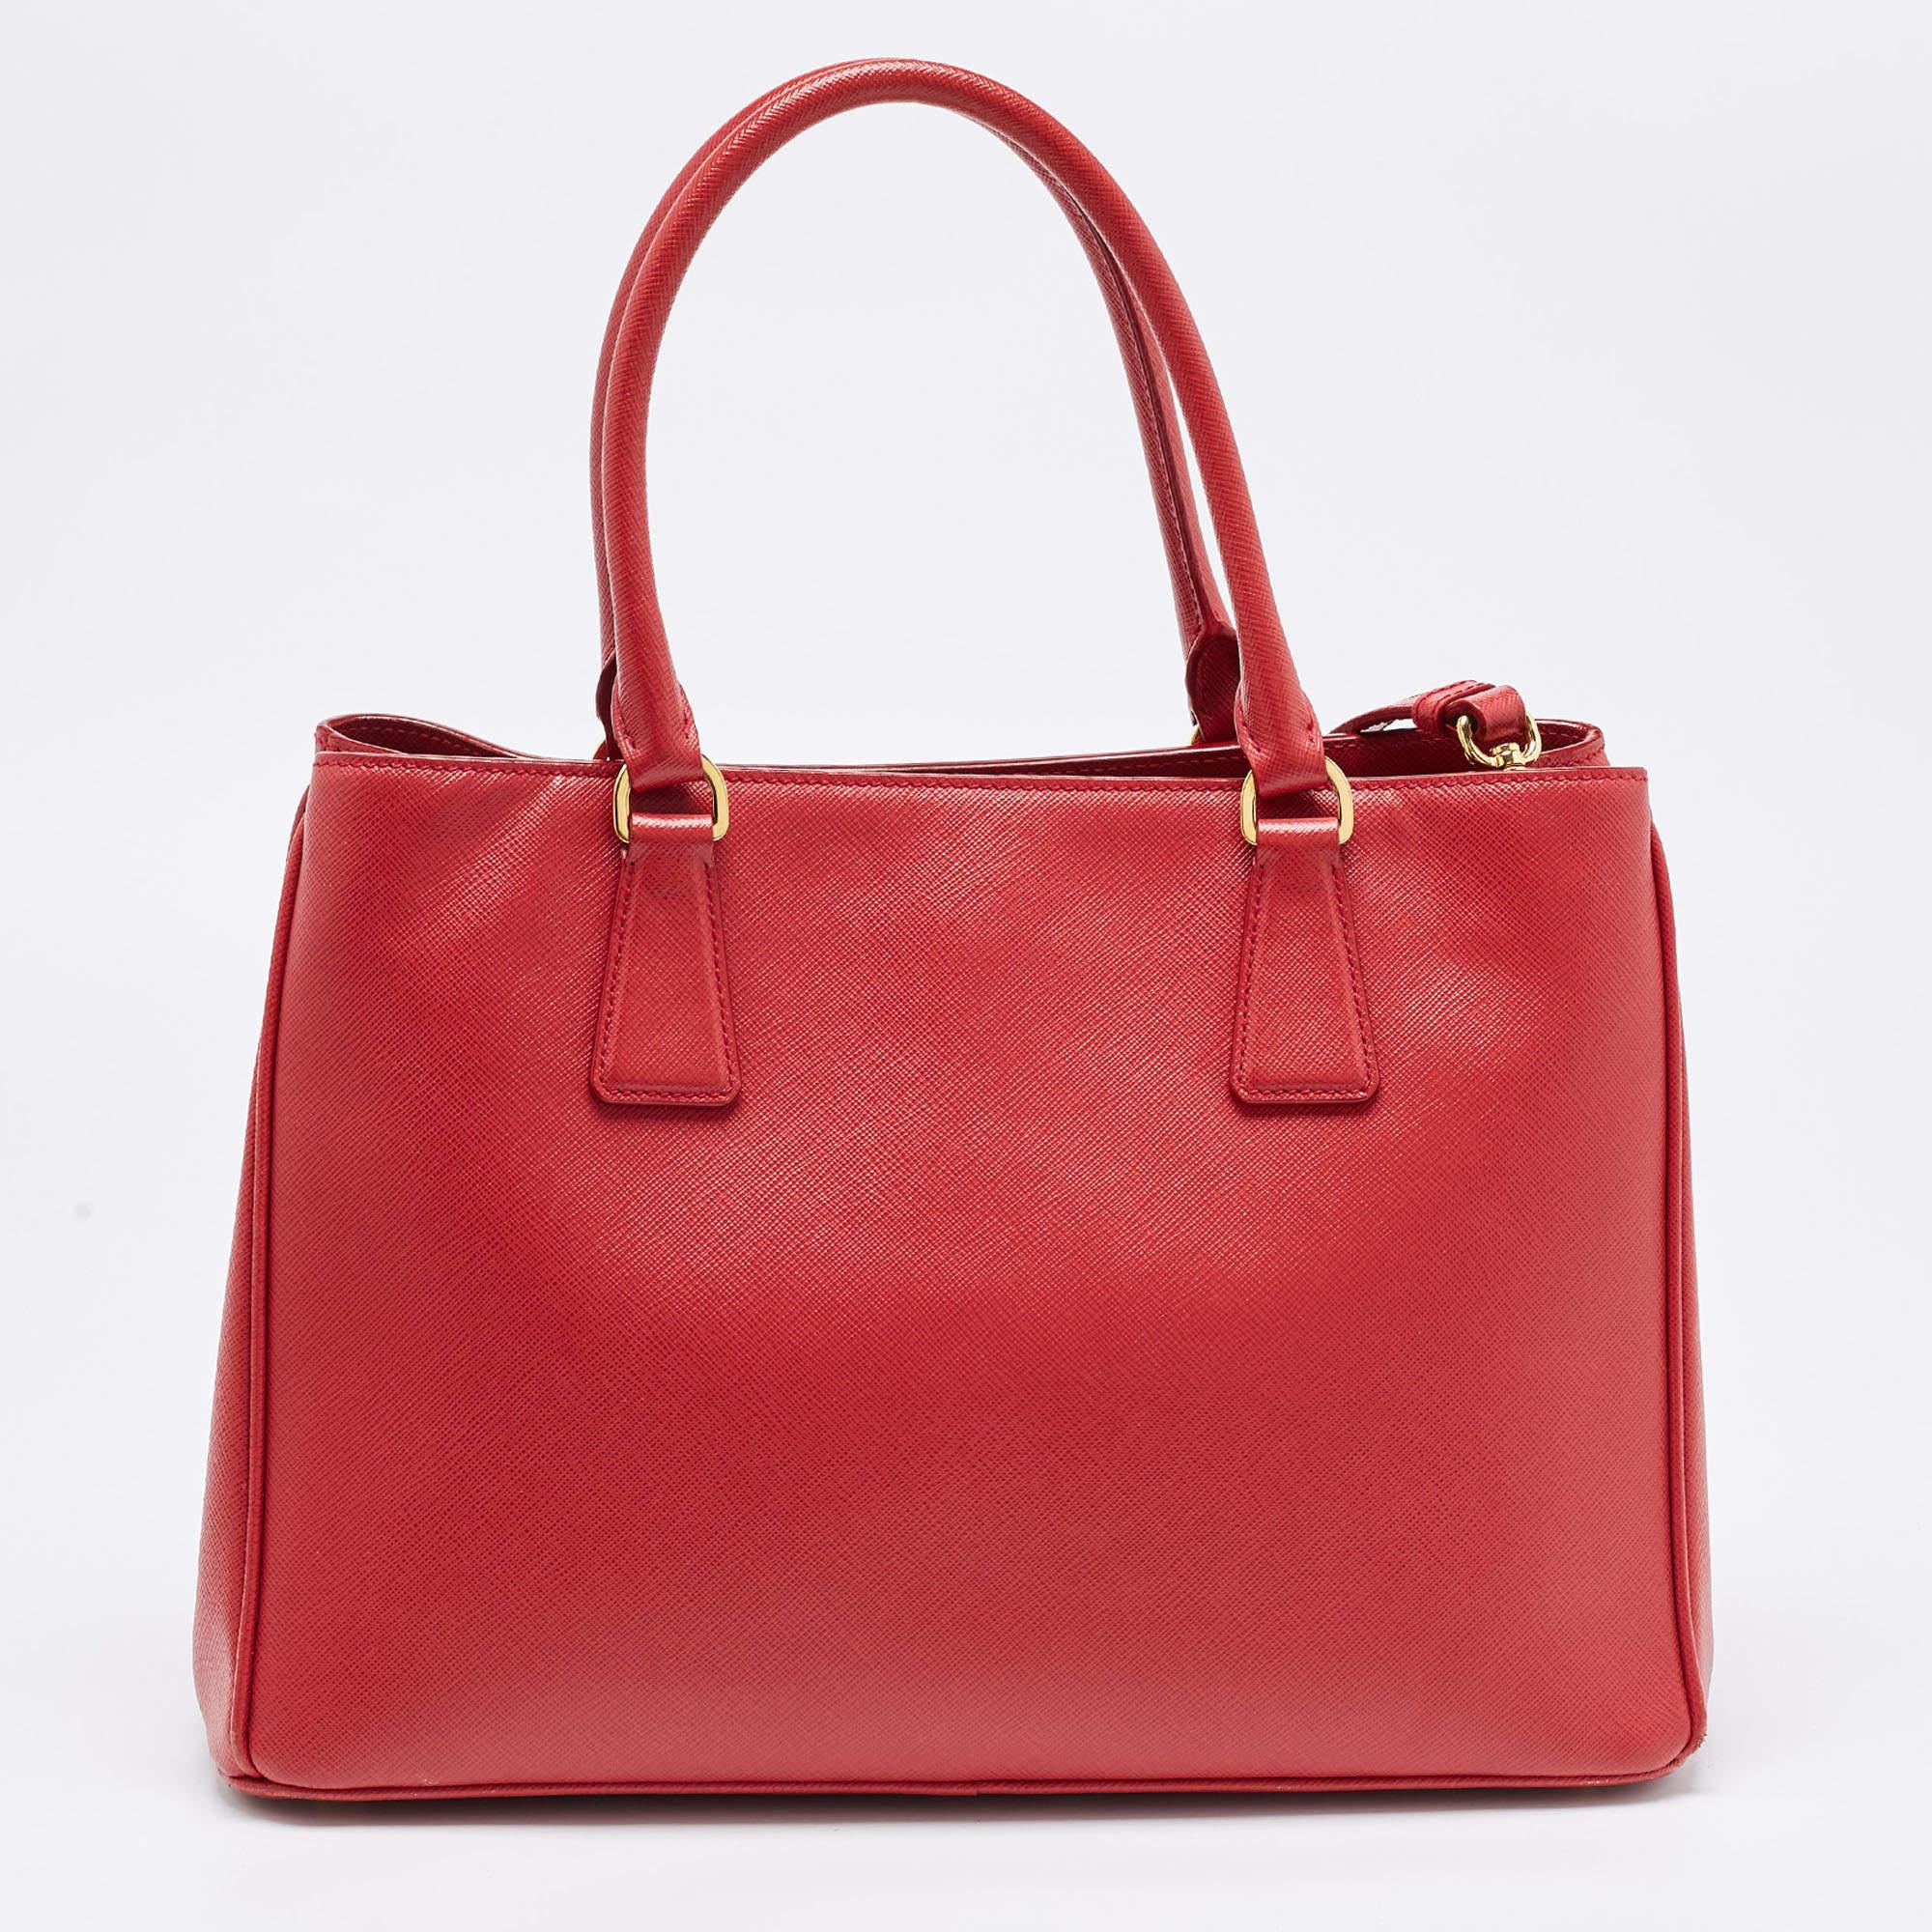 Indulge in luxury with this Prada red bag. Meticulously crafted from premium materials, it combines exquisite design, impeccable craftsmanship, and timeless elegance. Elevate your style with this fashion accessory.

